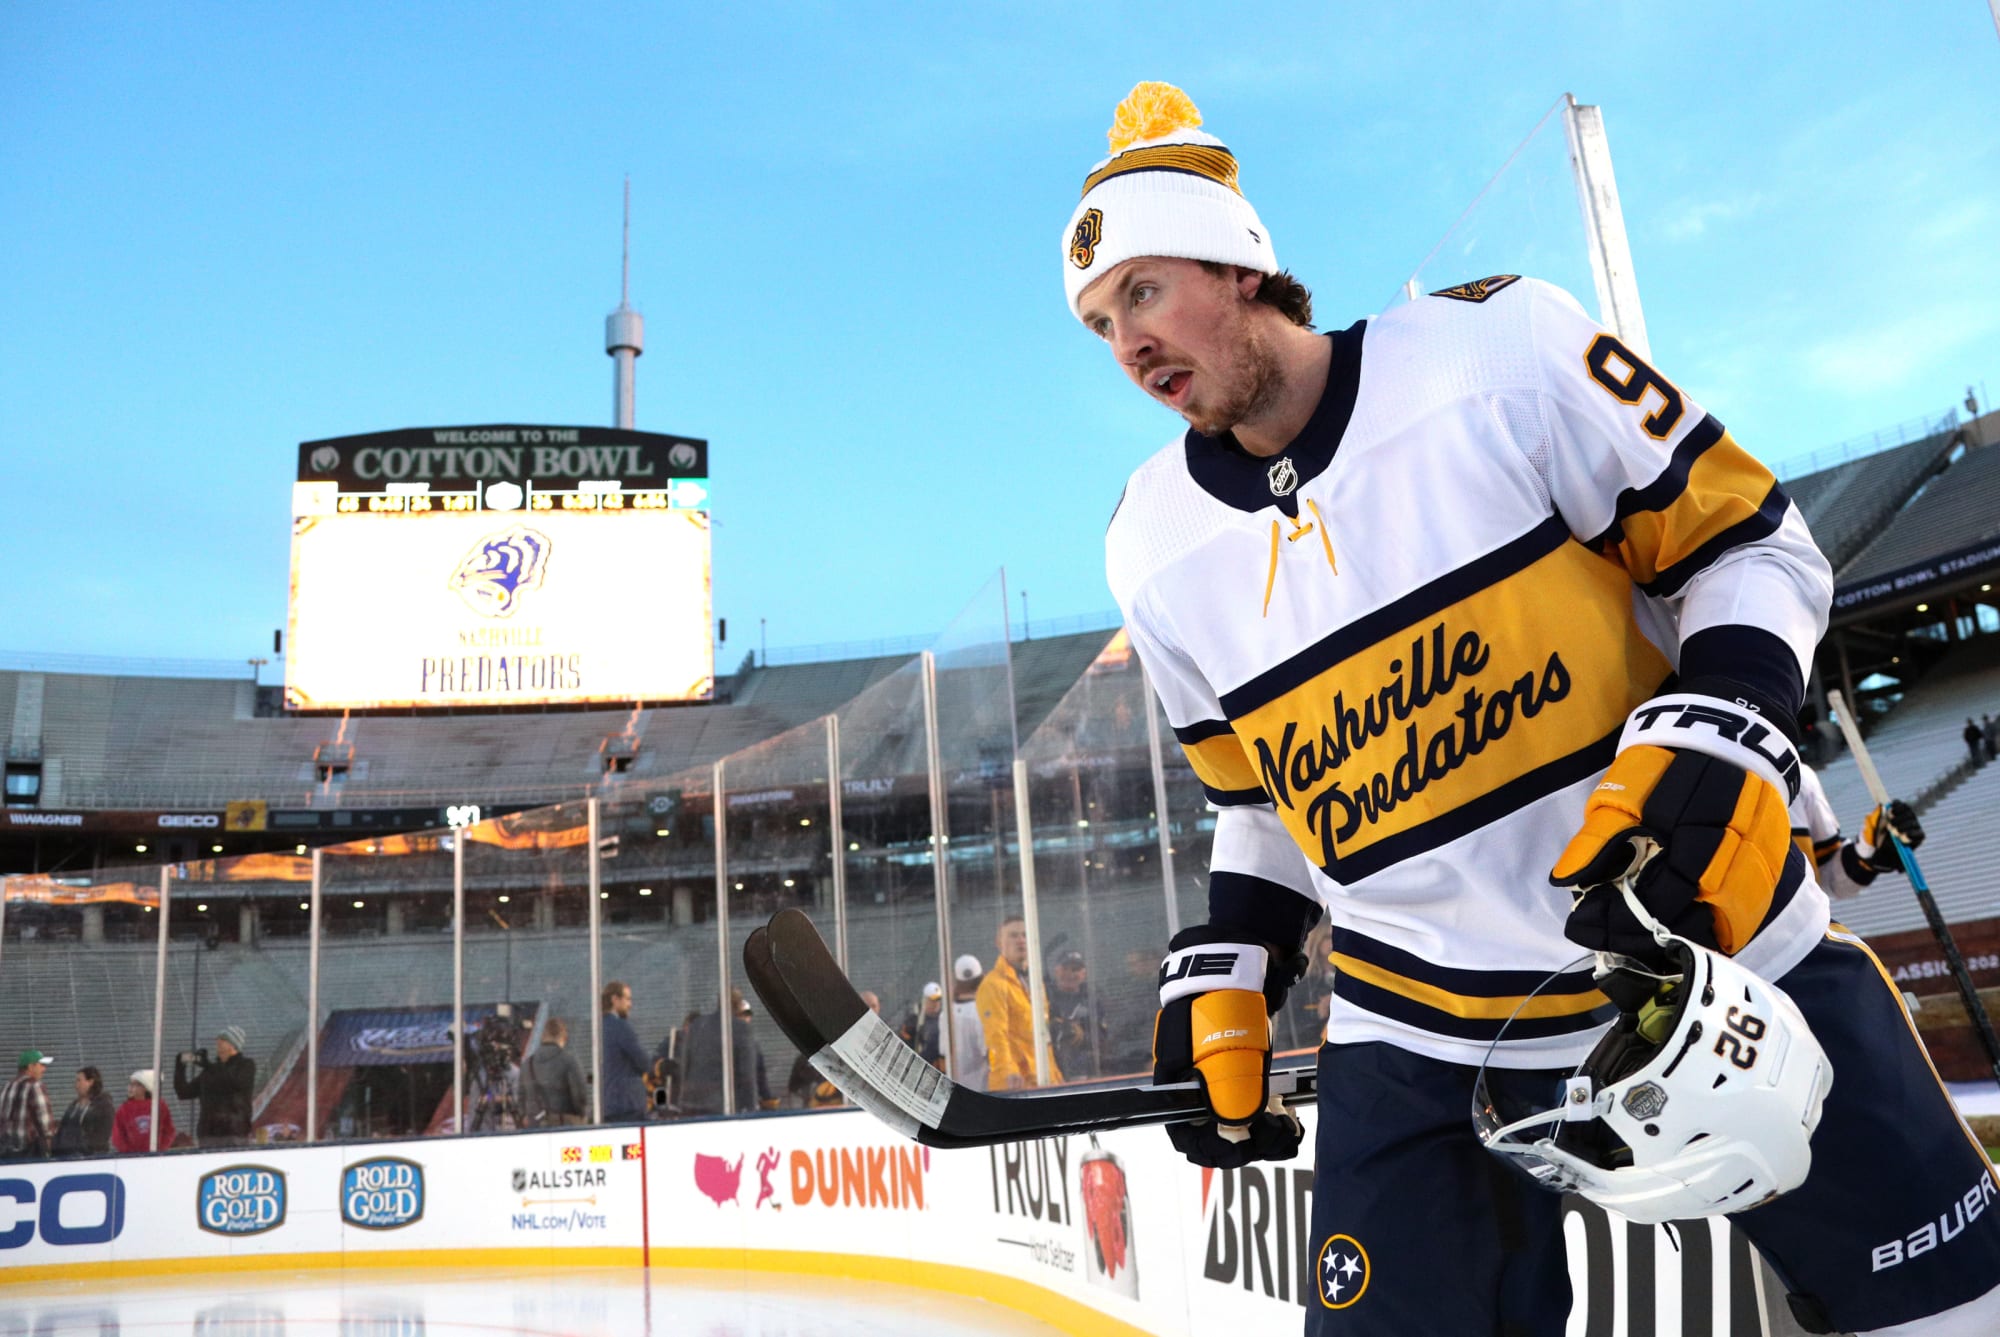 Photos: Fans at the 2020 Winter Classic between Predators and Stars